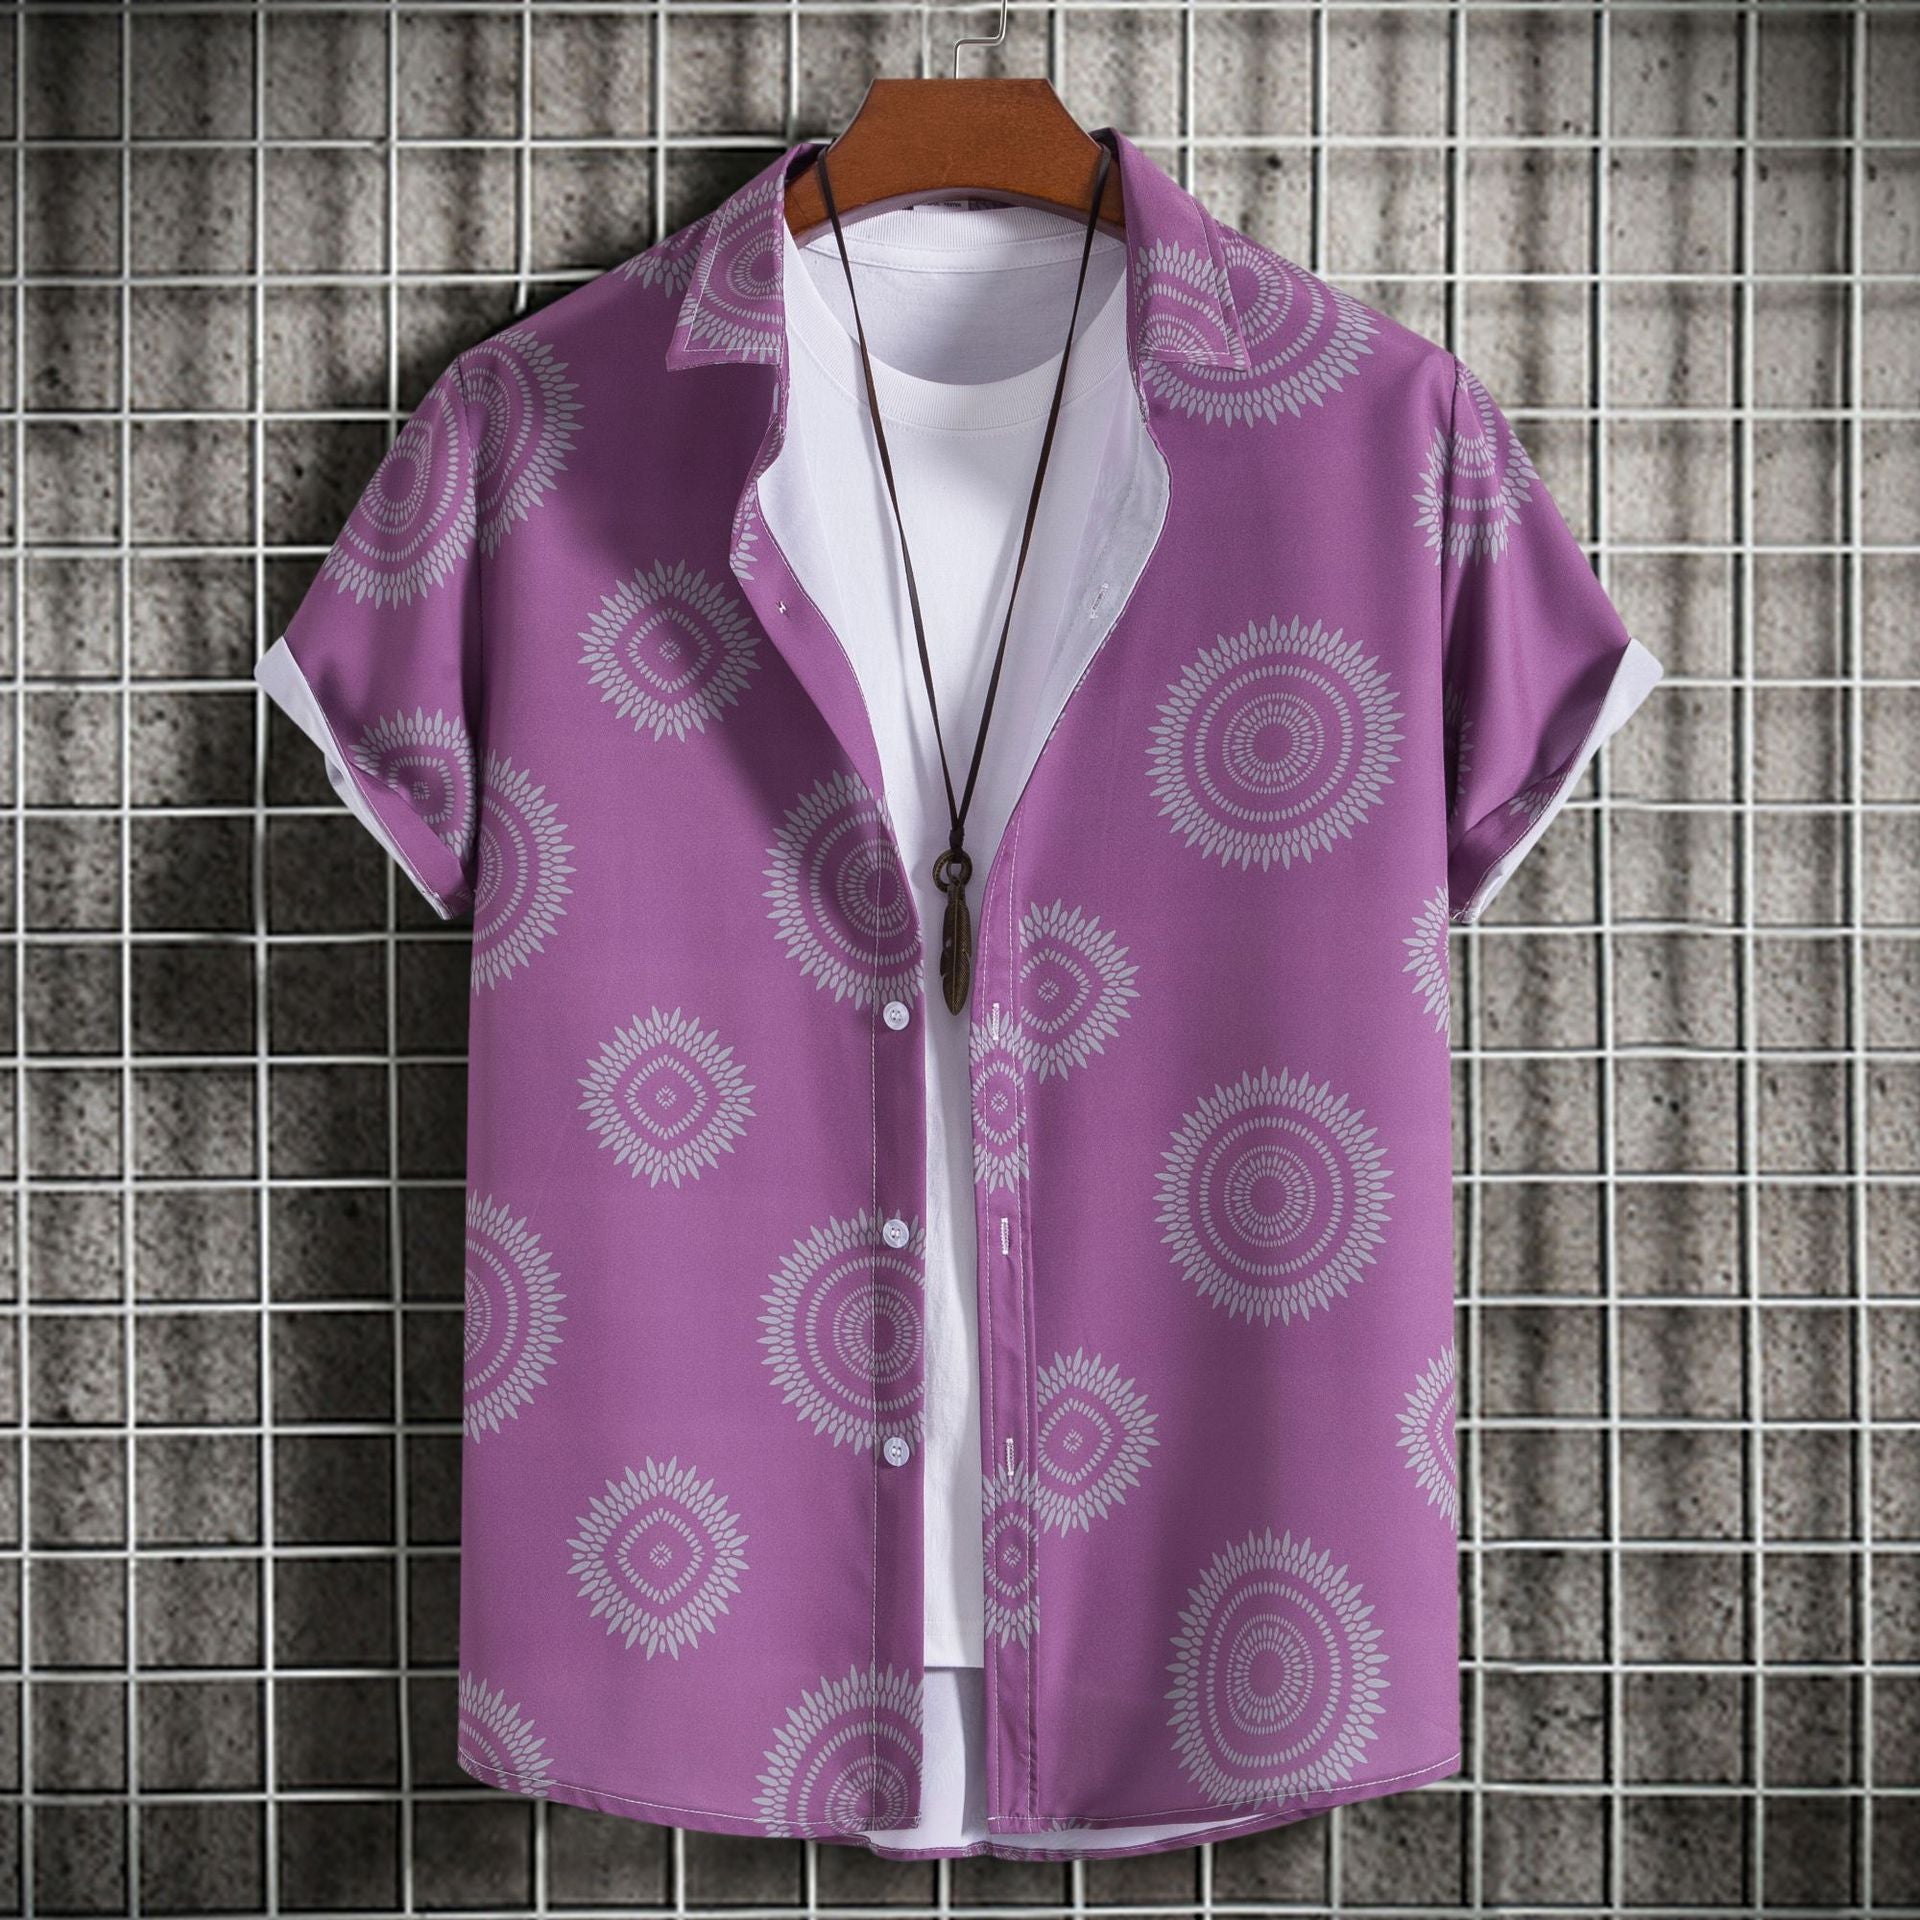 C219 - Men's Fashion Slim-fit Printed Short Sleeve Button Up Shirts - mens button up shirt at TFC&H Co.